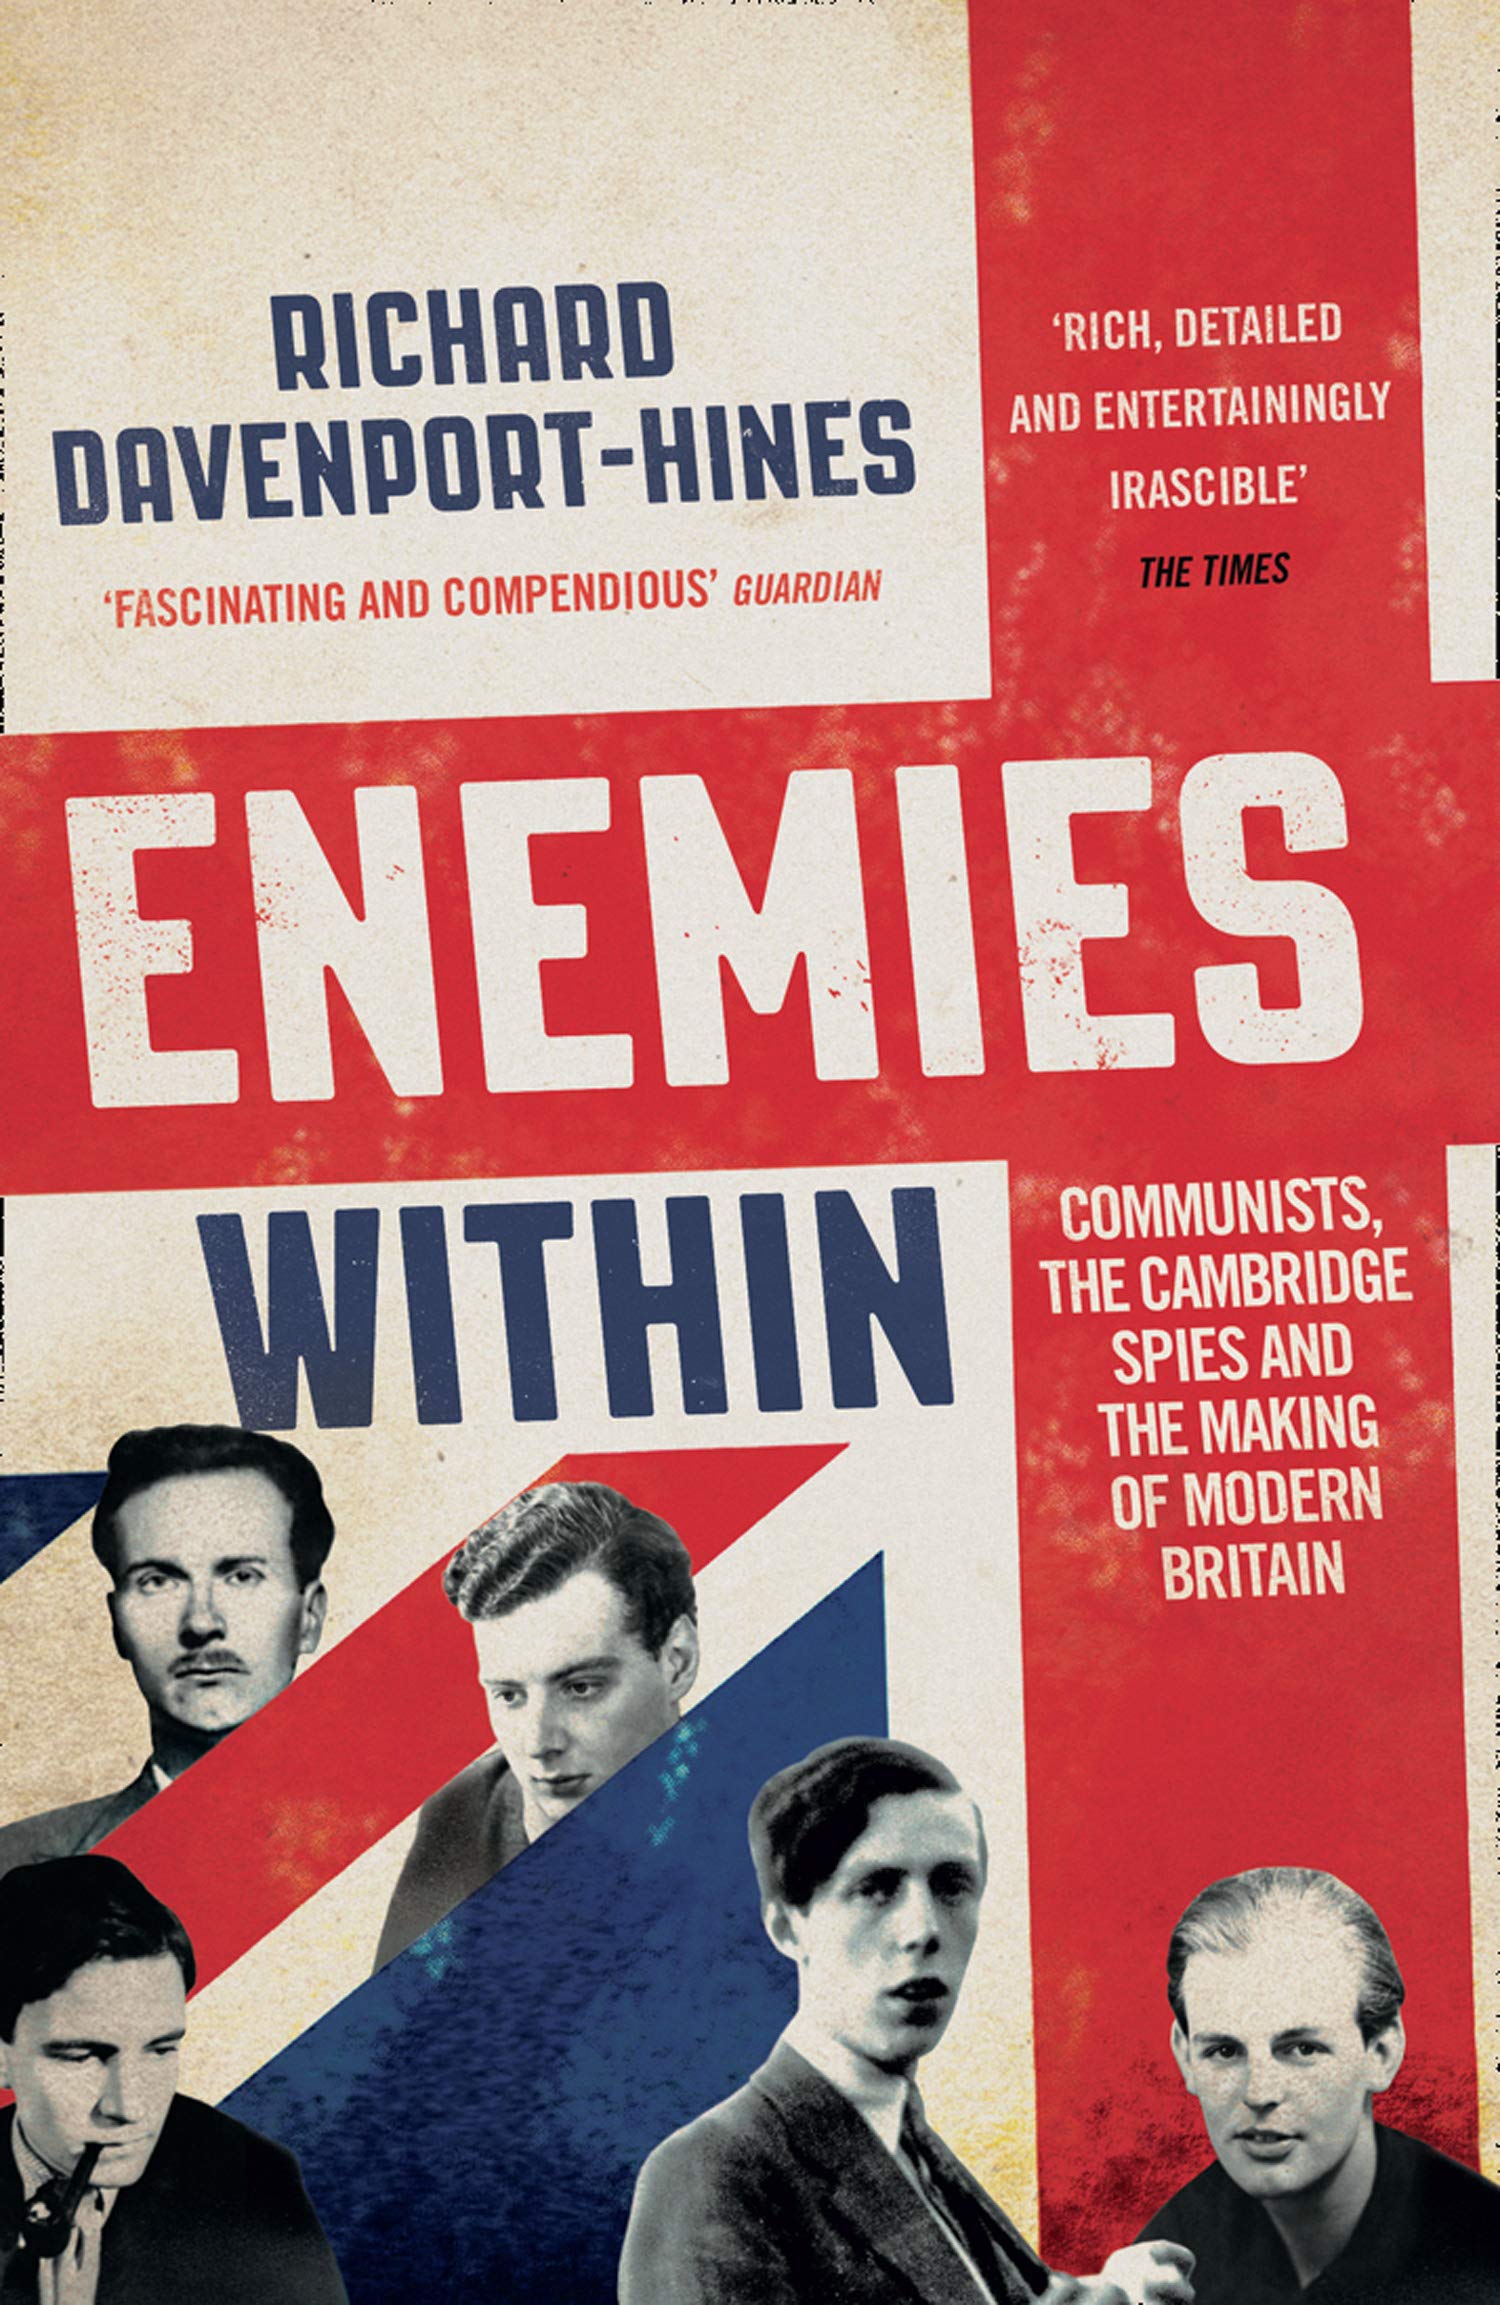 TRAITORS: Communists and the Making of Modern Britain | Richard Davenport-Hines